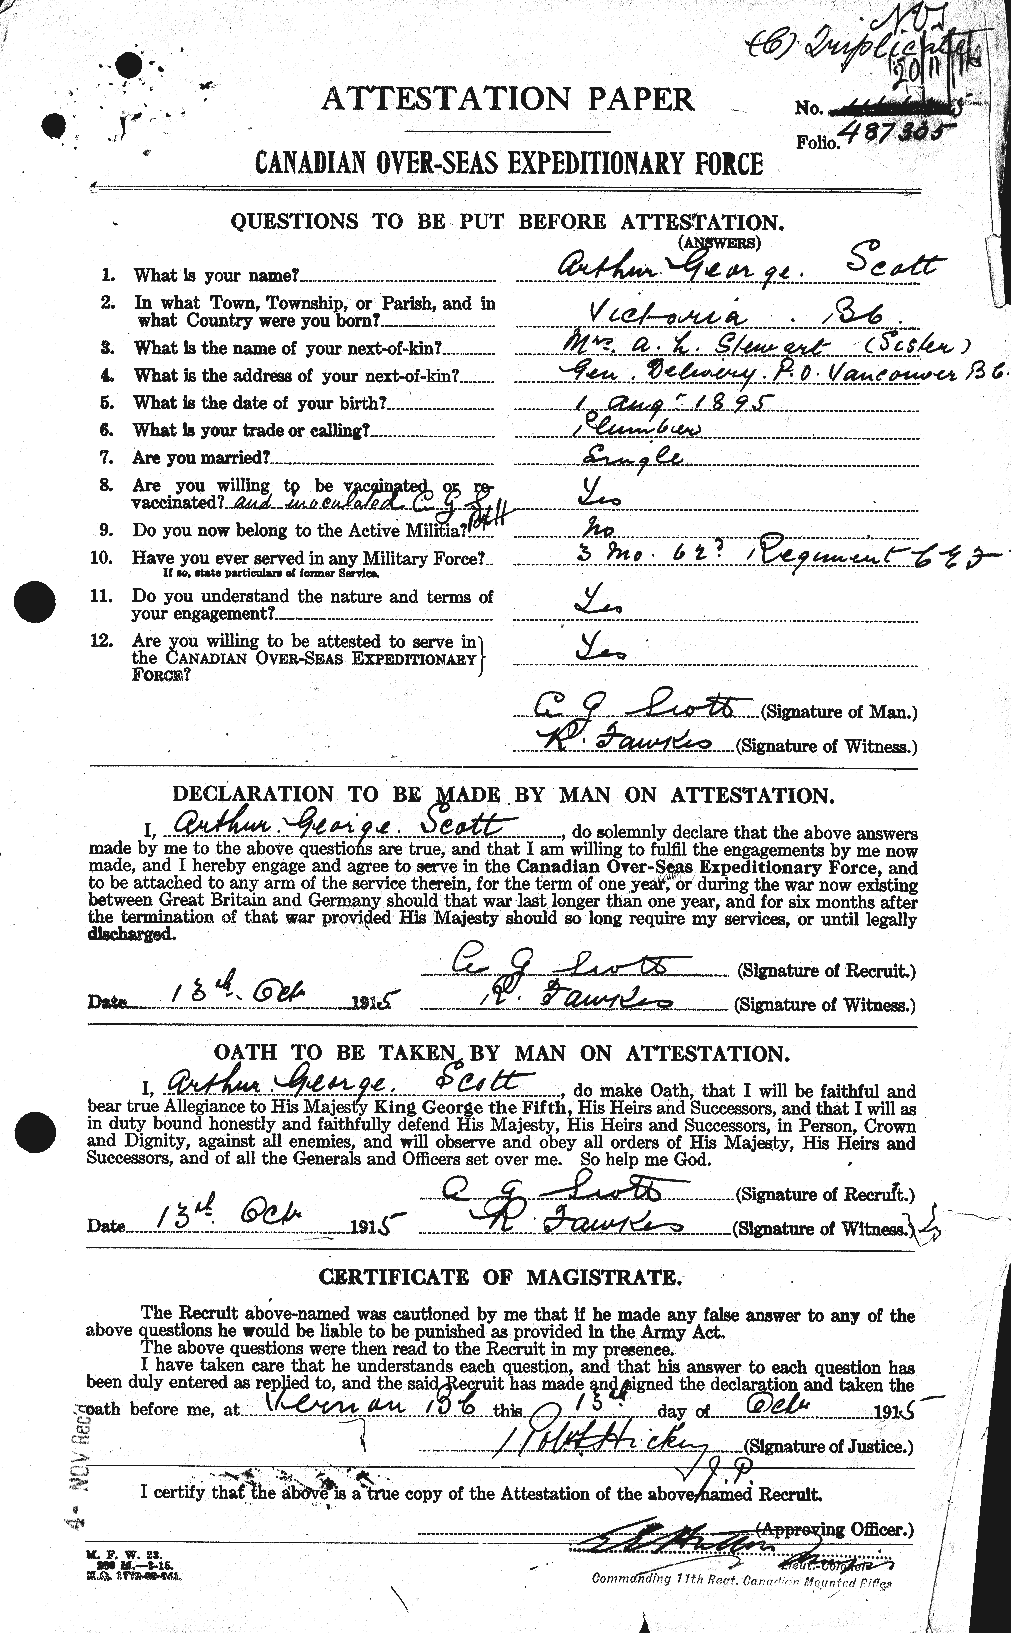 Personnel Records of the First World War - CEF 086401a